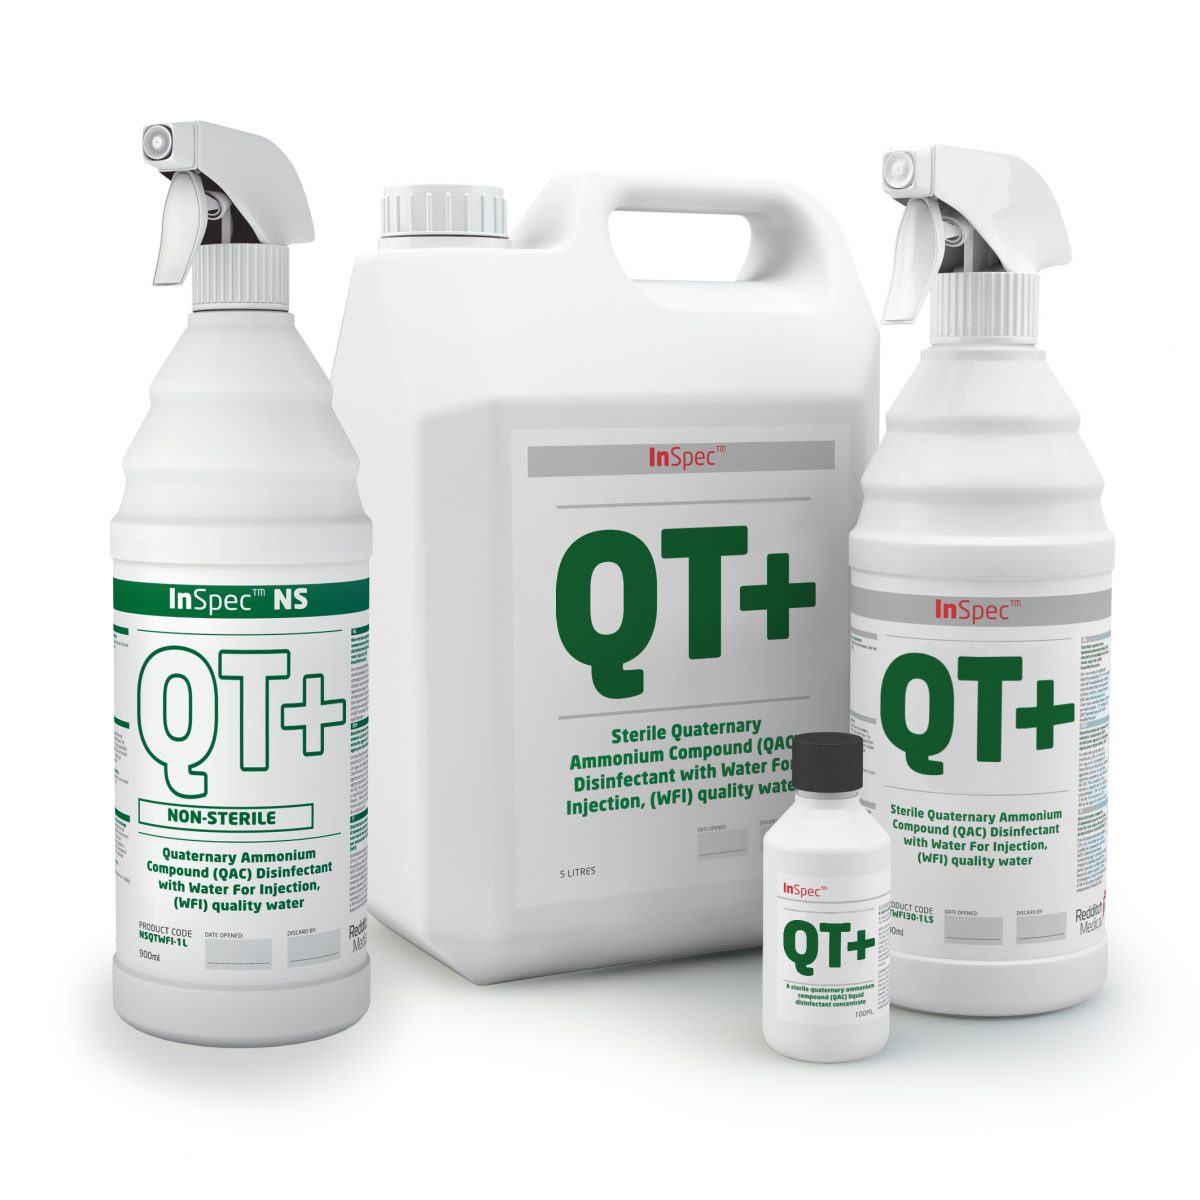 InSpec QT+ disinfectant group - Integrity Cleanroom